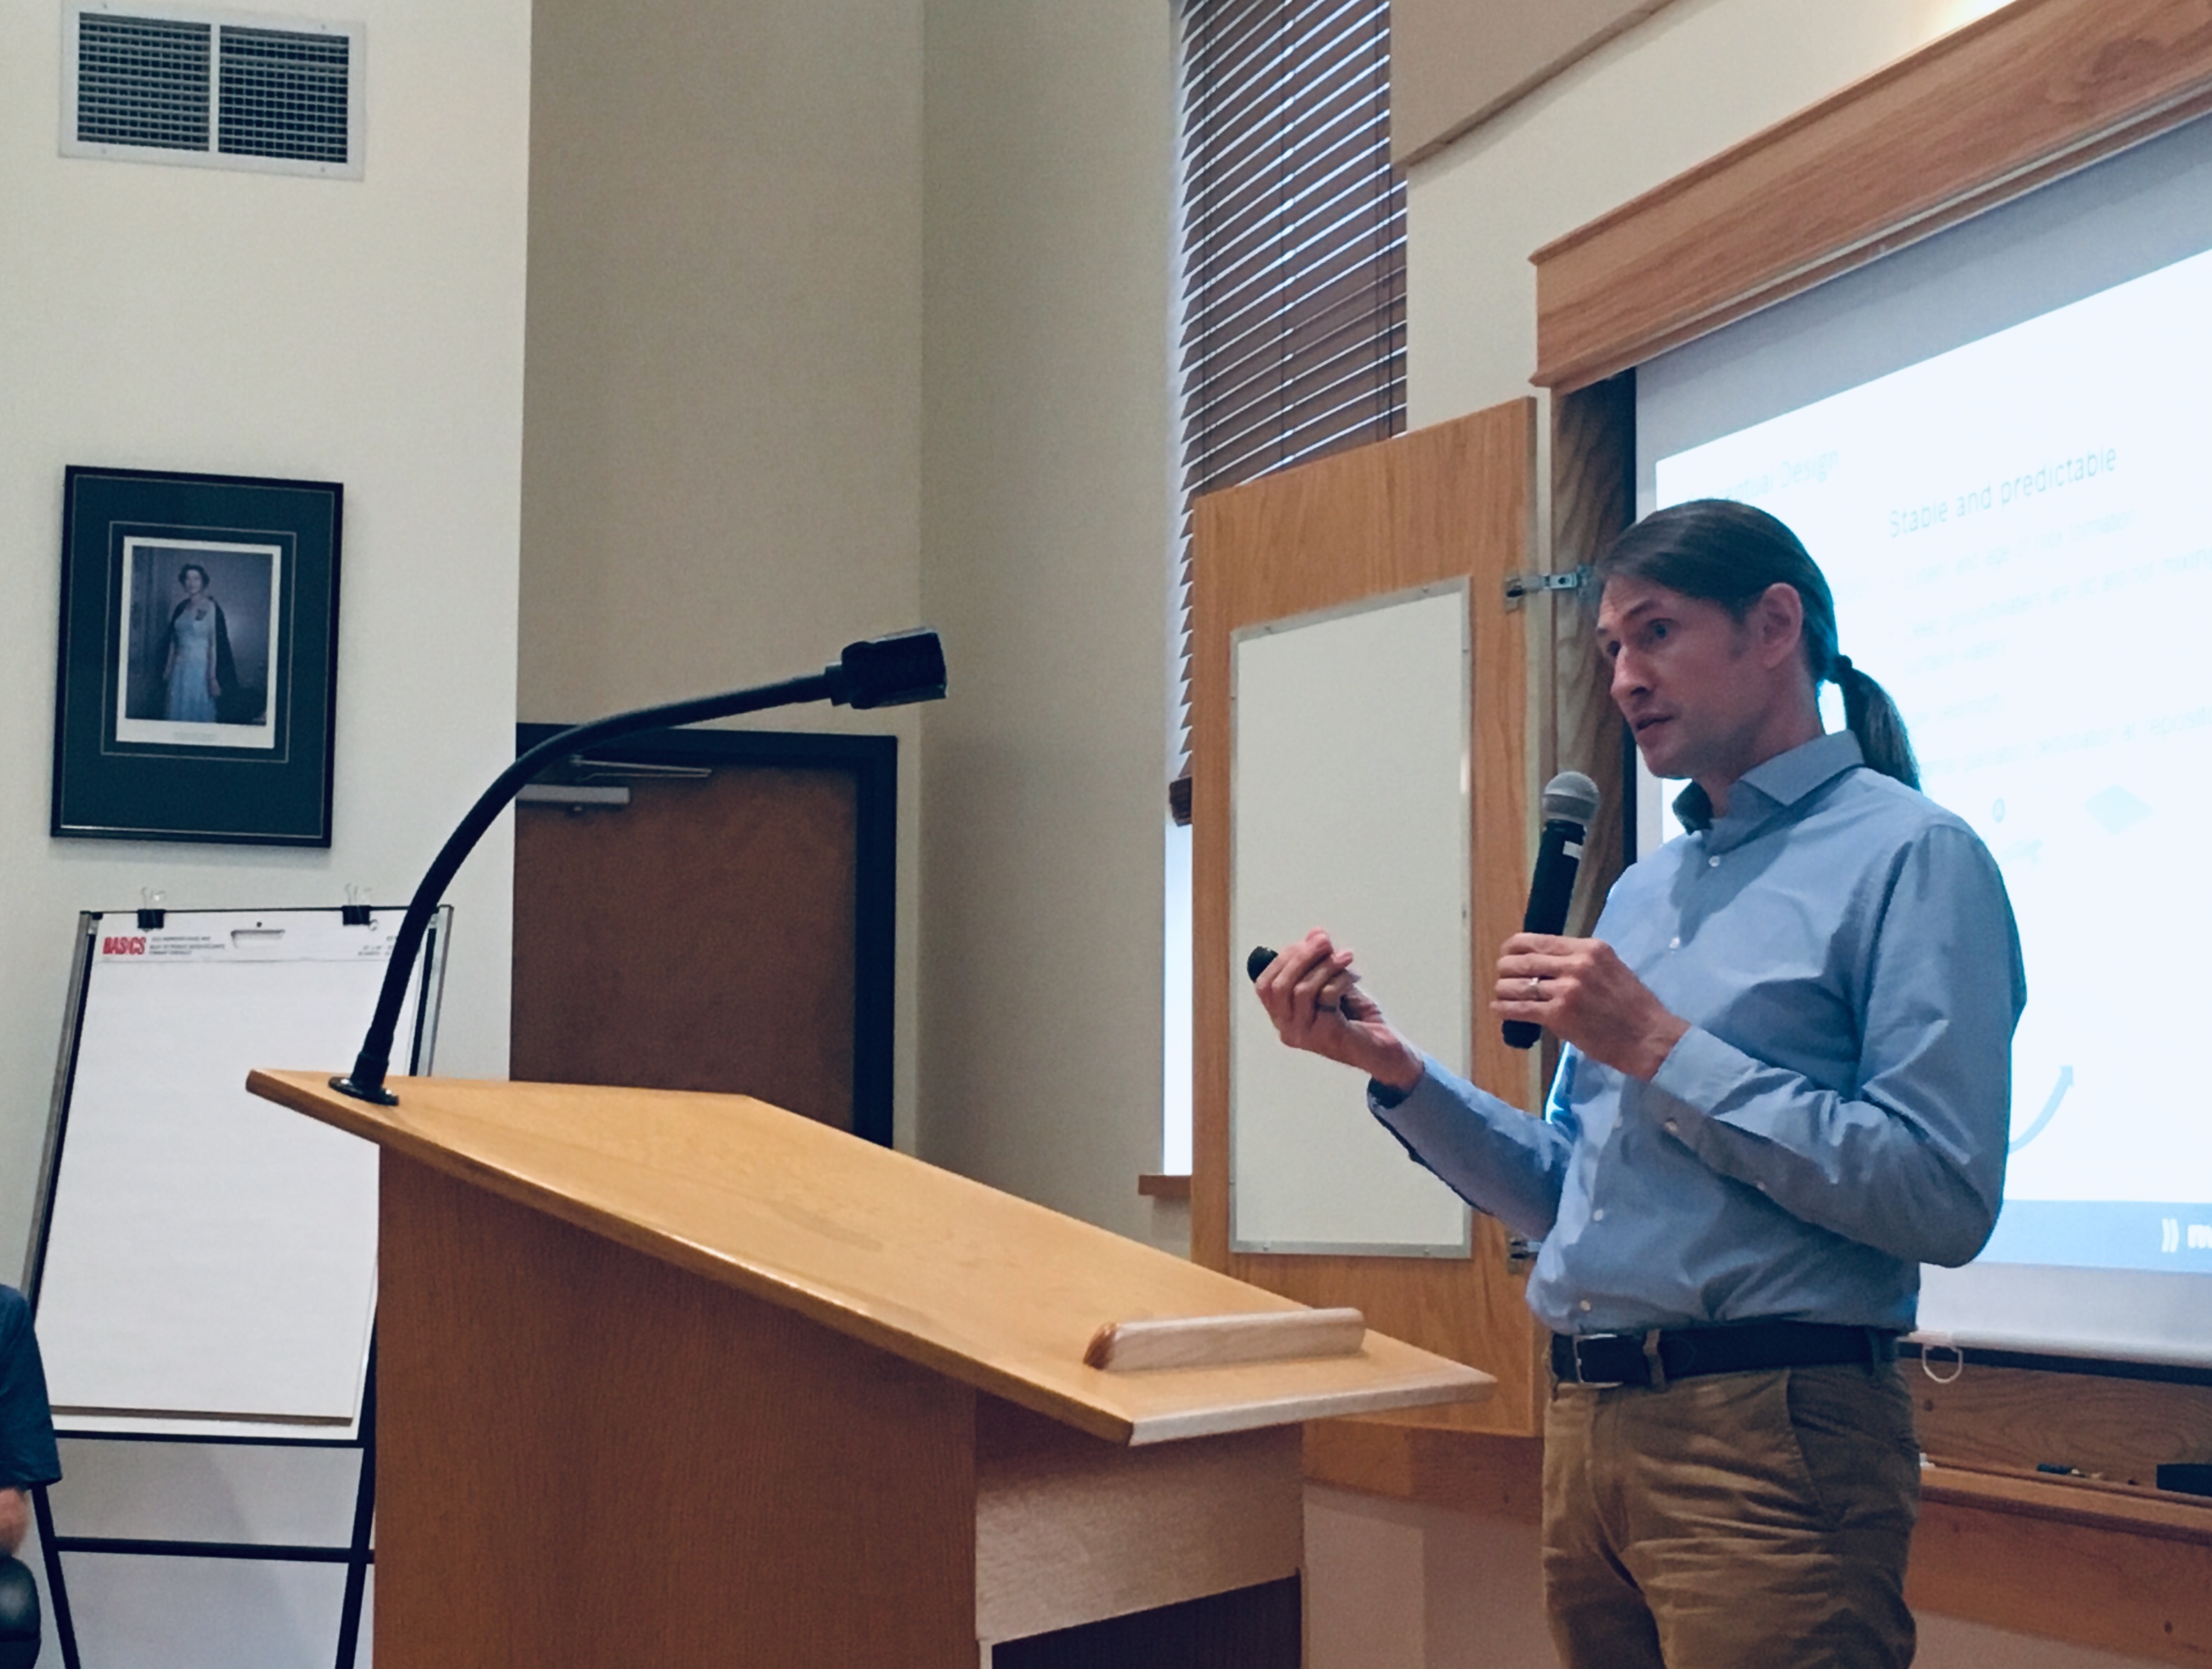 The NWMO’s Dr. Erik Kremer discusses findings from the seventh case study, which assesses the long-term safety of a deep geological repository in sedimentary rock formations, similar to those found in southern Bruce County.